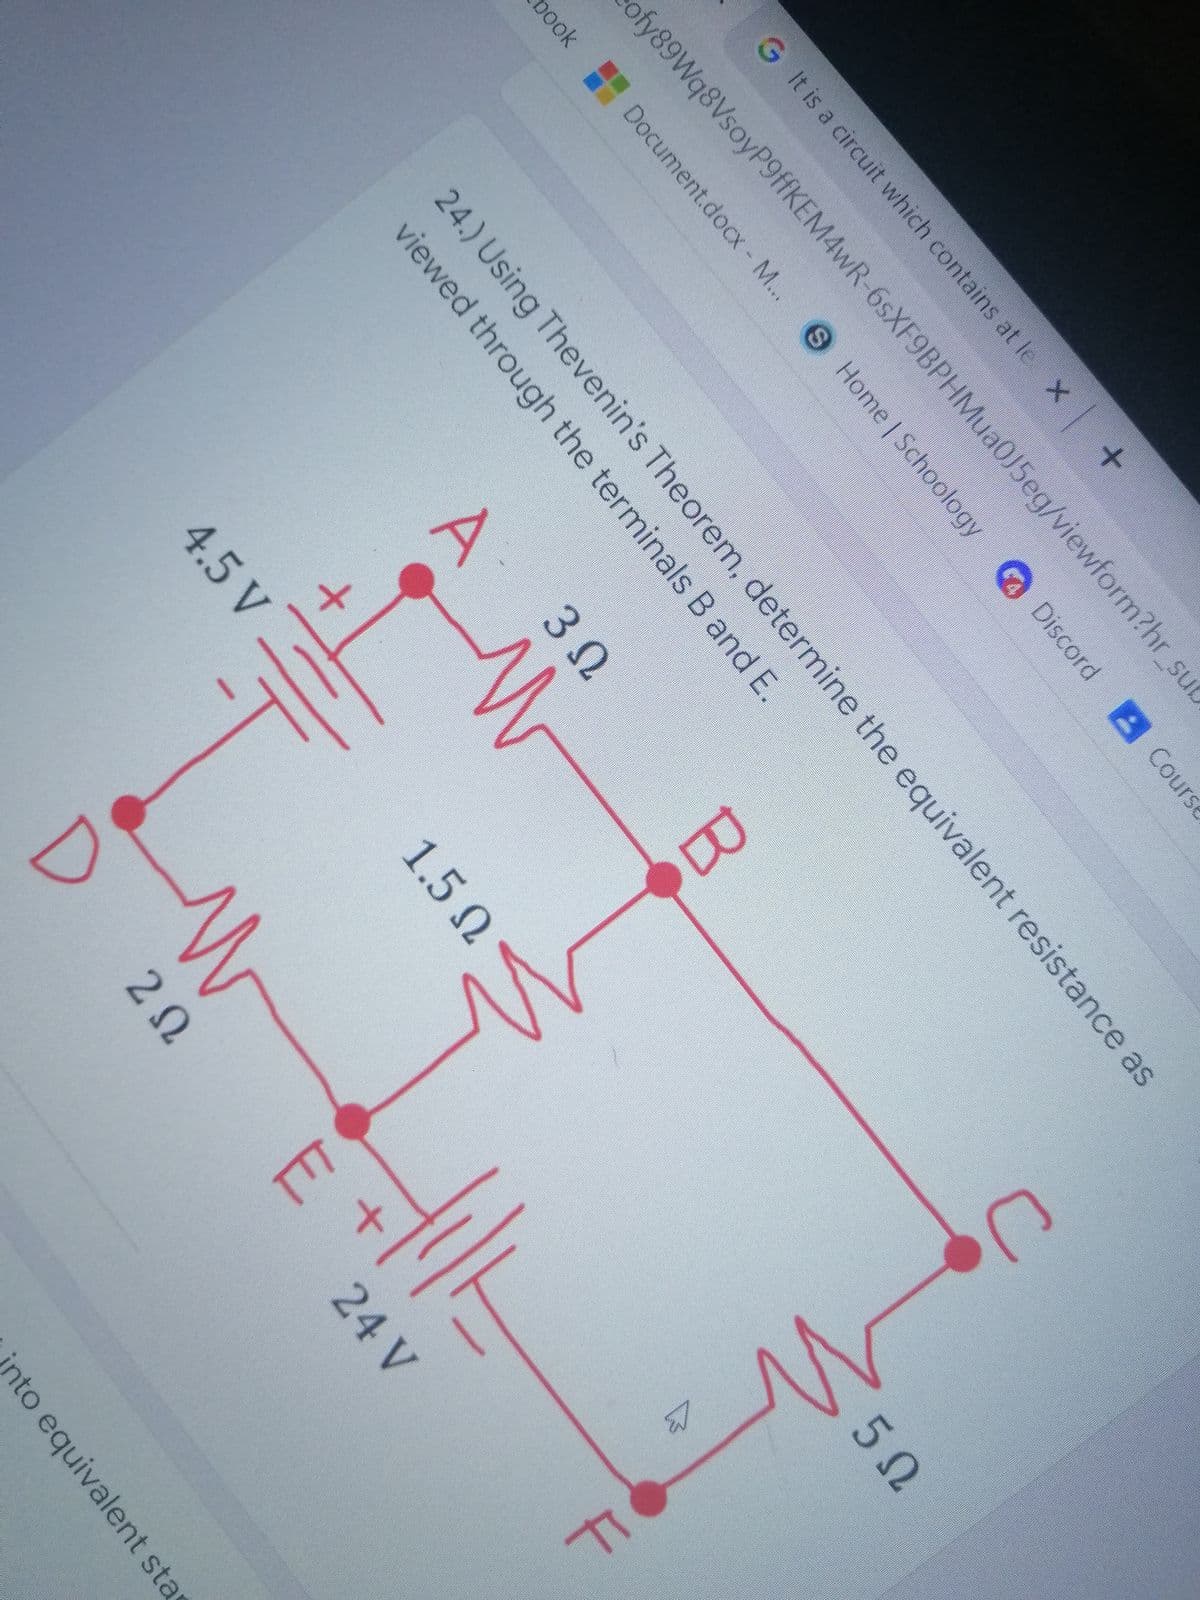 G It is a circuit which contains at le X +
ofy89Wq8VsoyP9ffKEM4wR-6sXF9BPHMua0J5eg/viewform?hr_su
S Home | Schoology
Discord A Course
pook Document.docx - M...
24.) Using Thevenin's Theorem, determine the equivalent resistance as
viewed through the terminals B and E.
3 2
4.5 V
1.5 N
Ω
50
20
24 V
into equivalent sta
